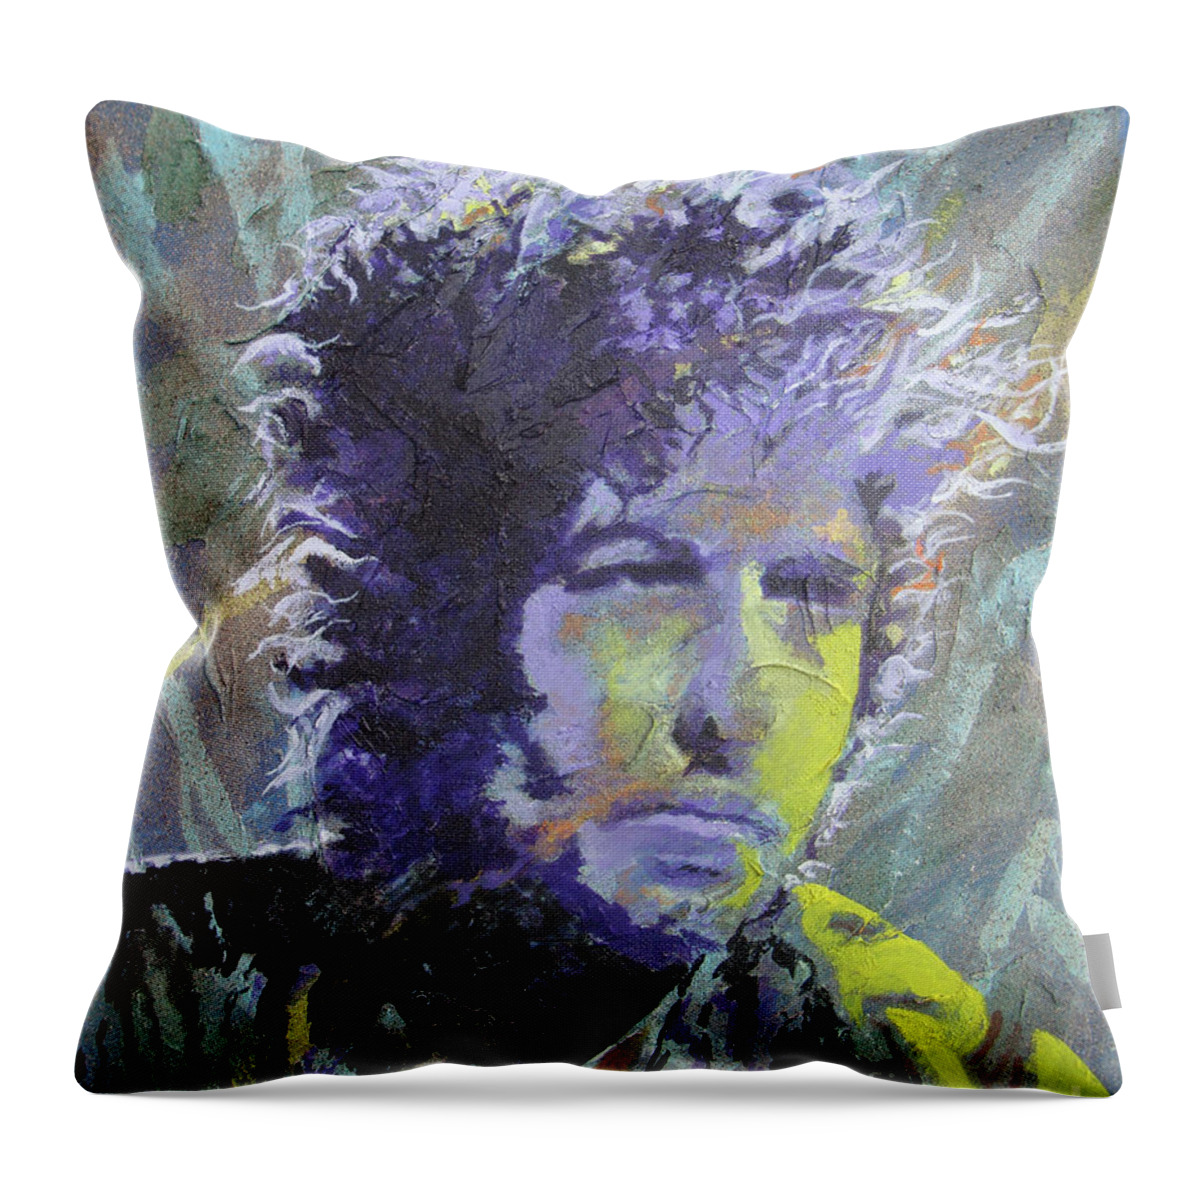 Bob Dylan Throw Pillow featuring the painting Tangled Up by Stuart Engel